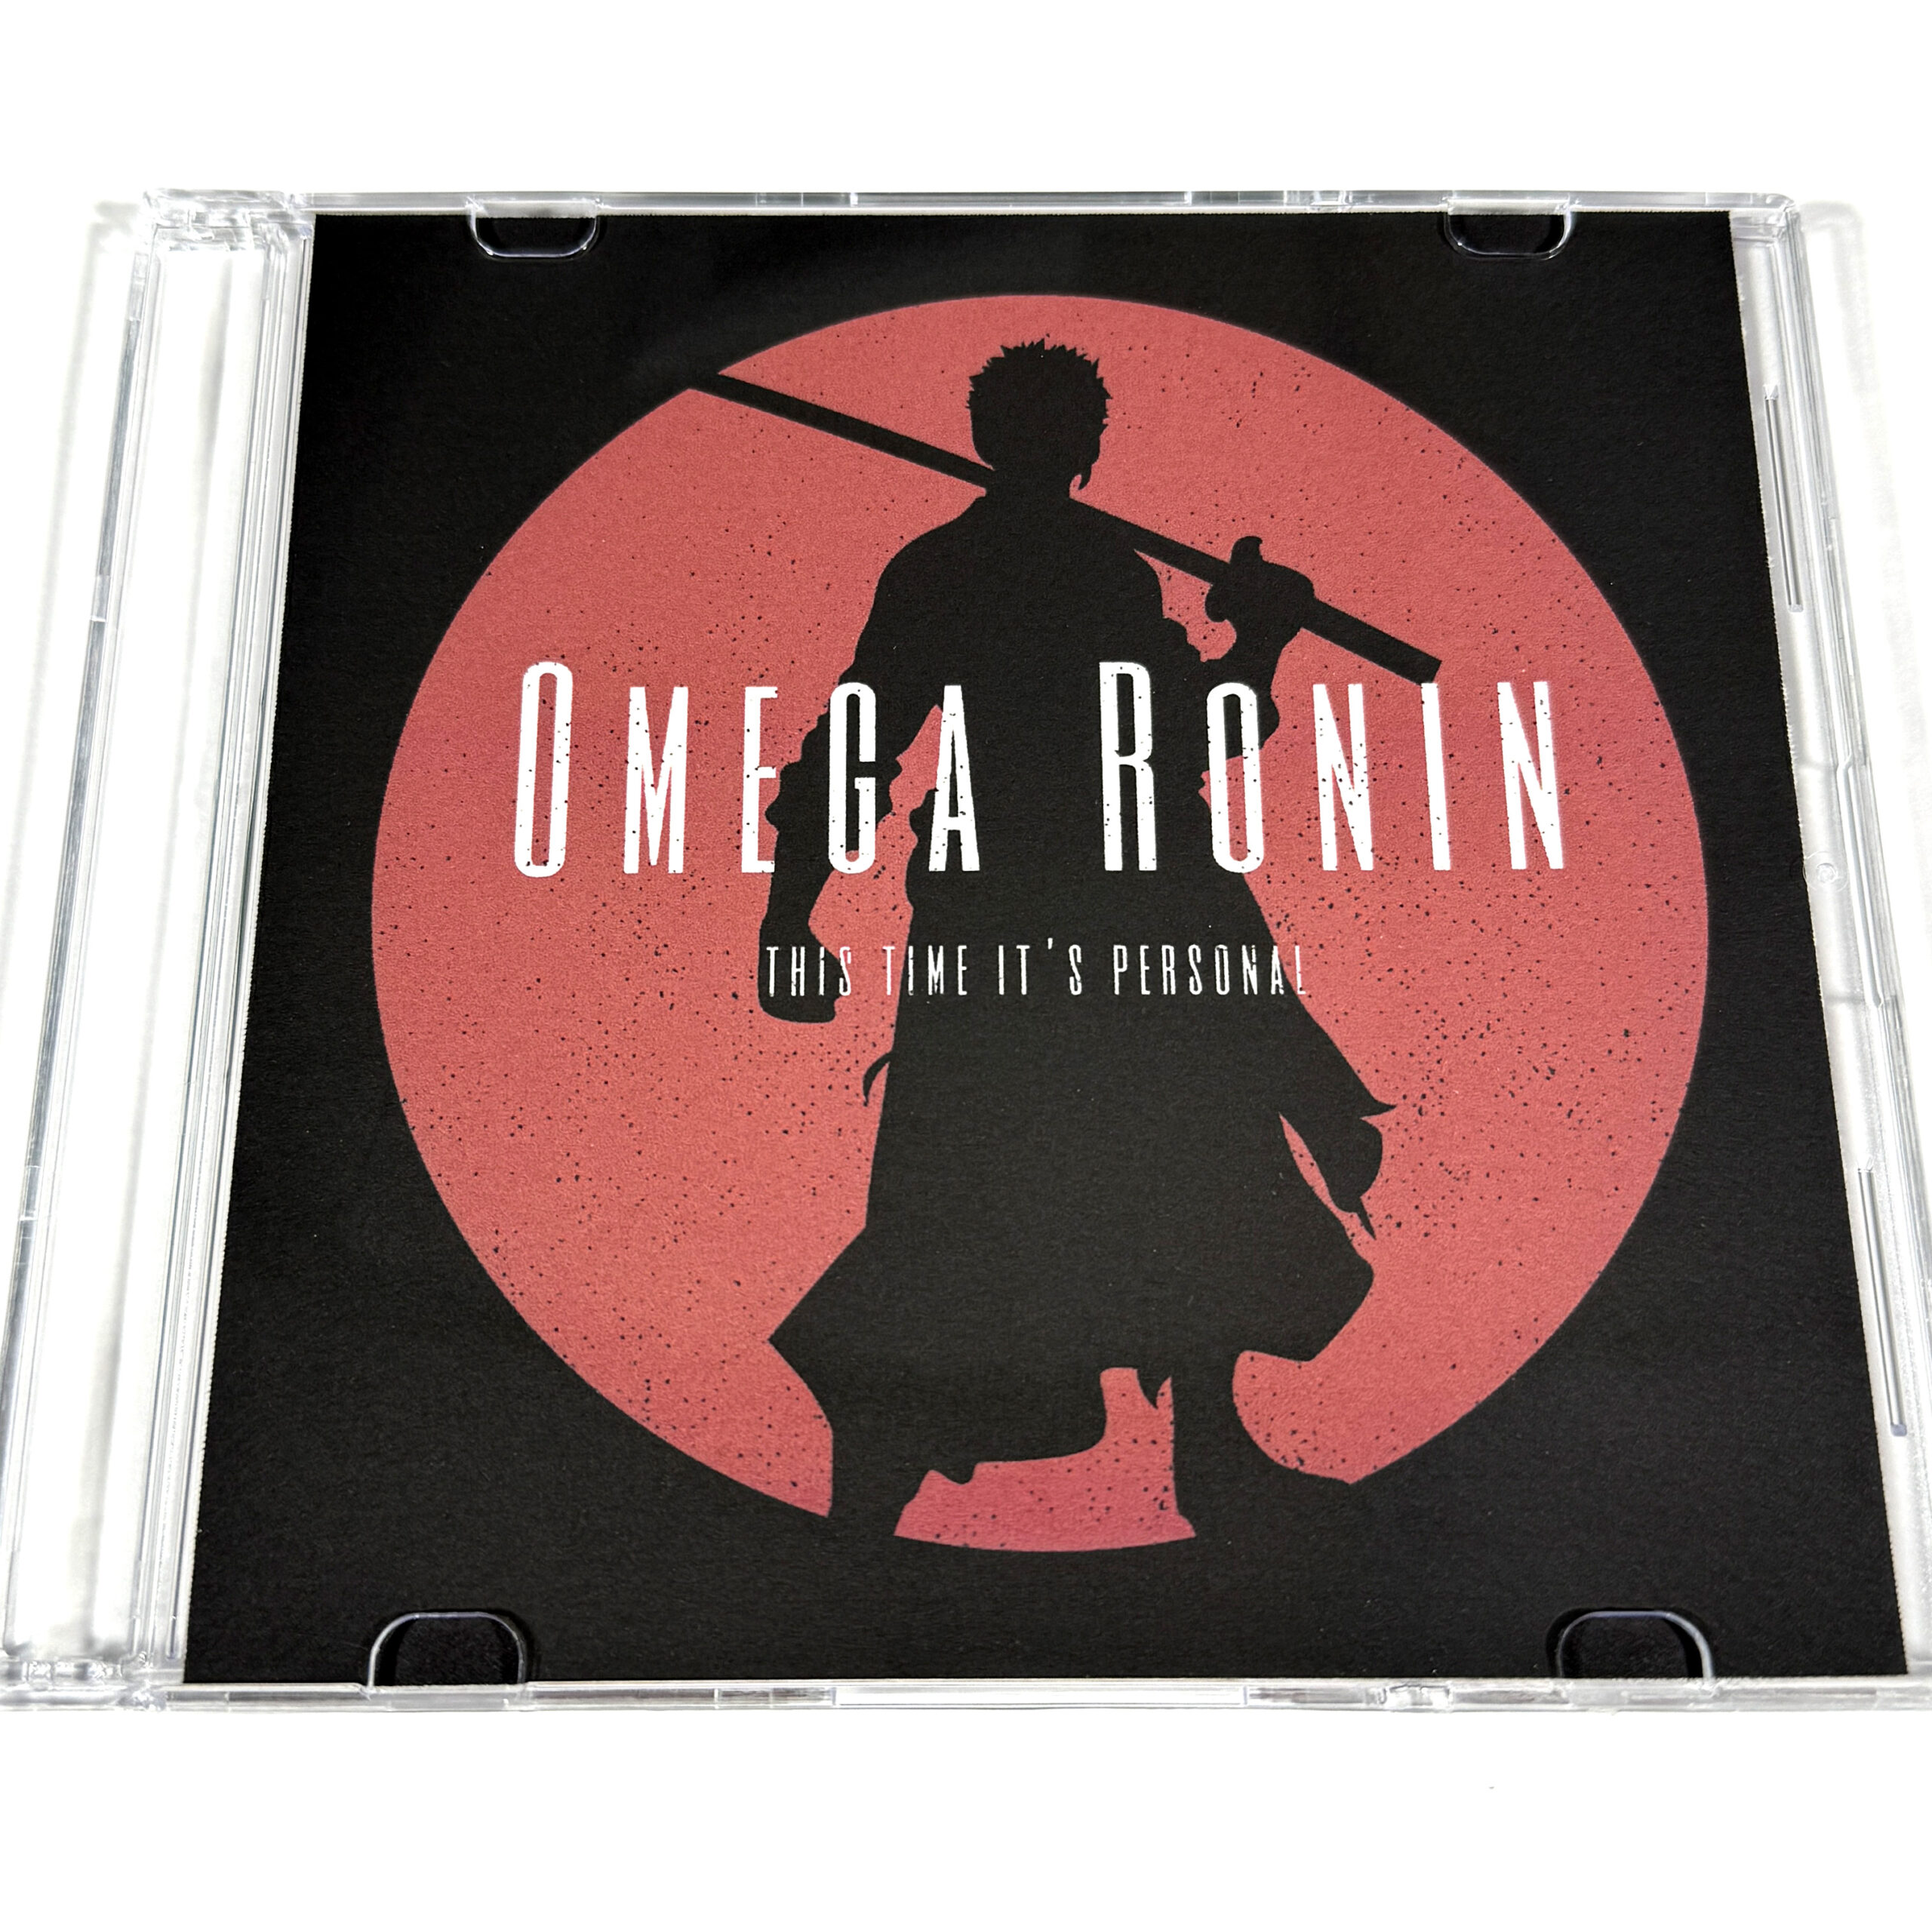 Omega Ronin: This Time It's Personal CD